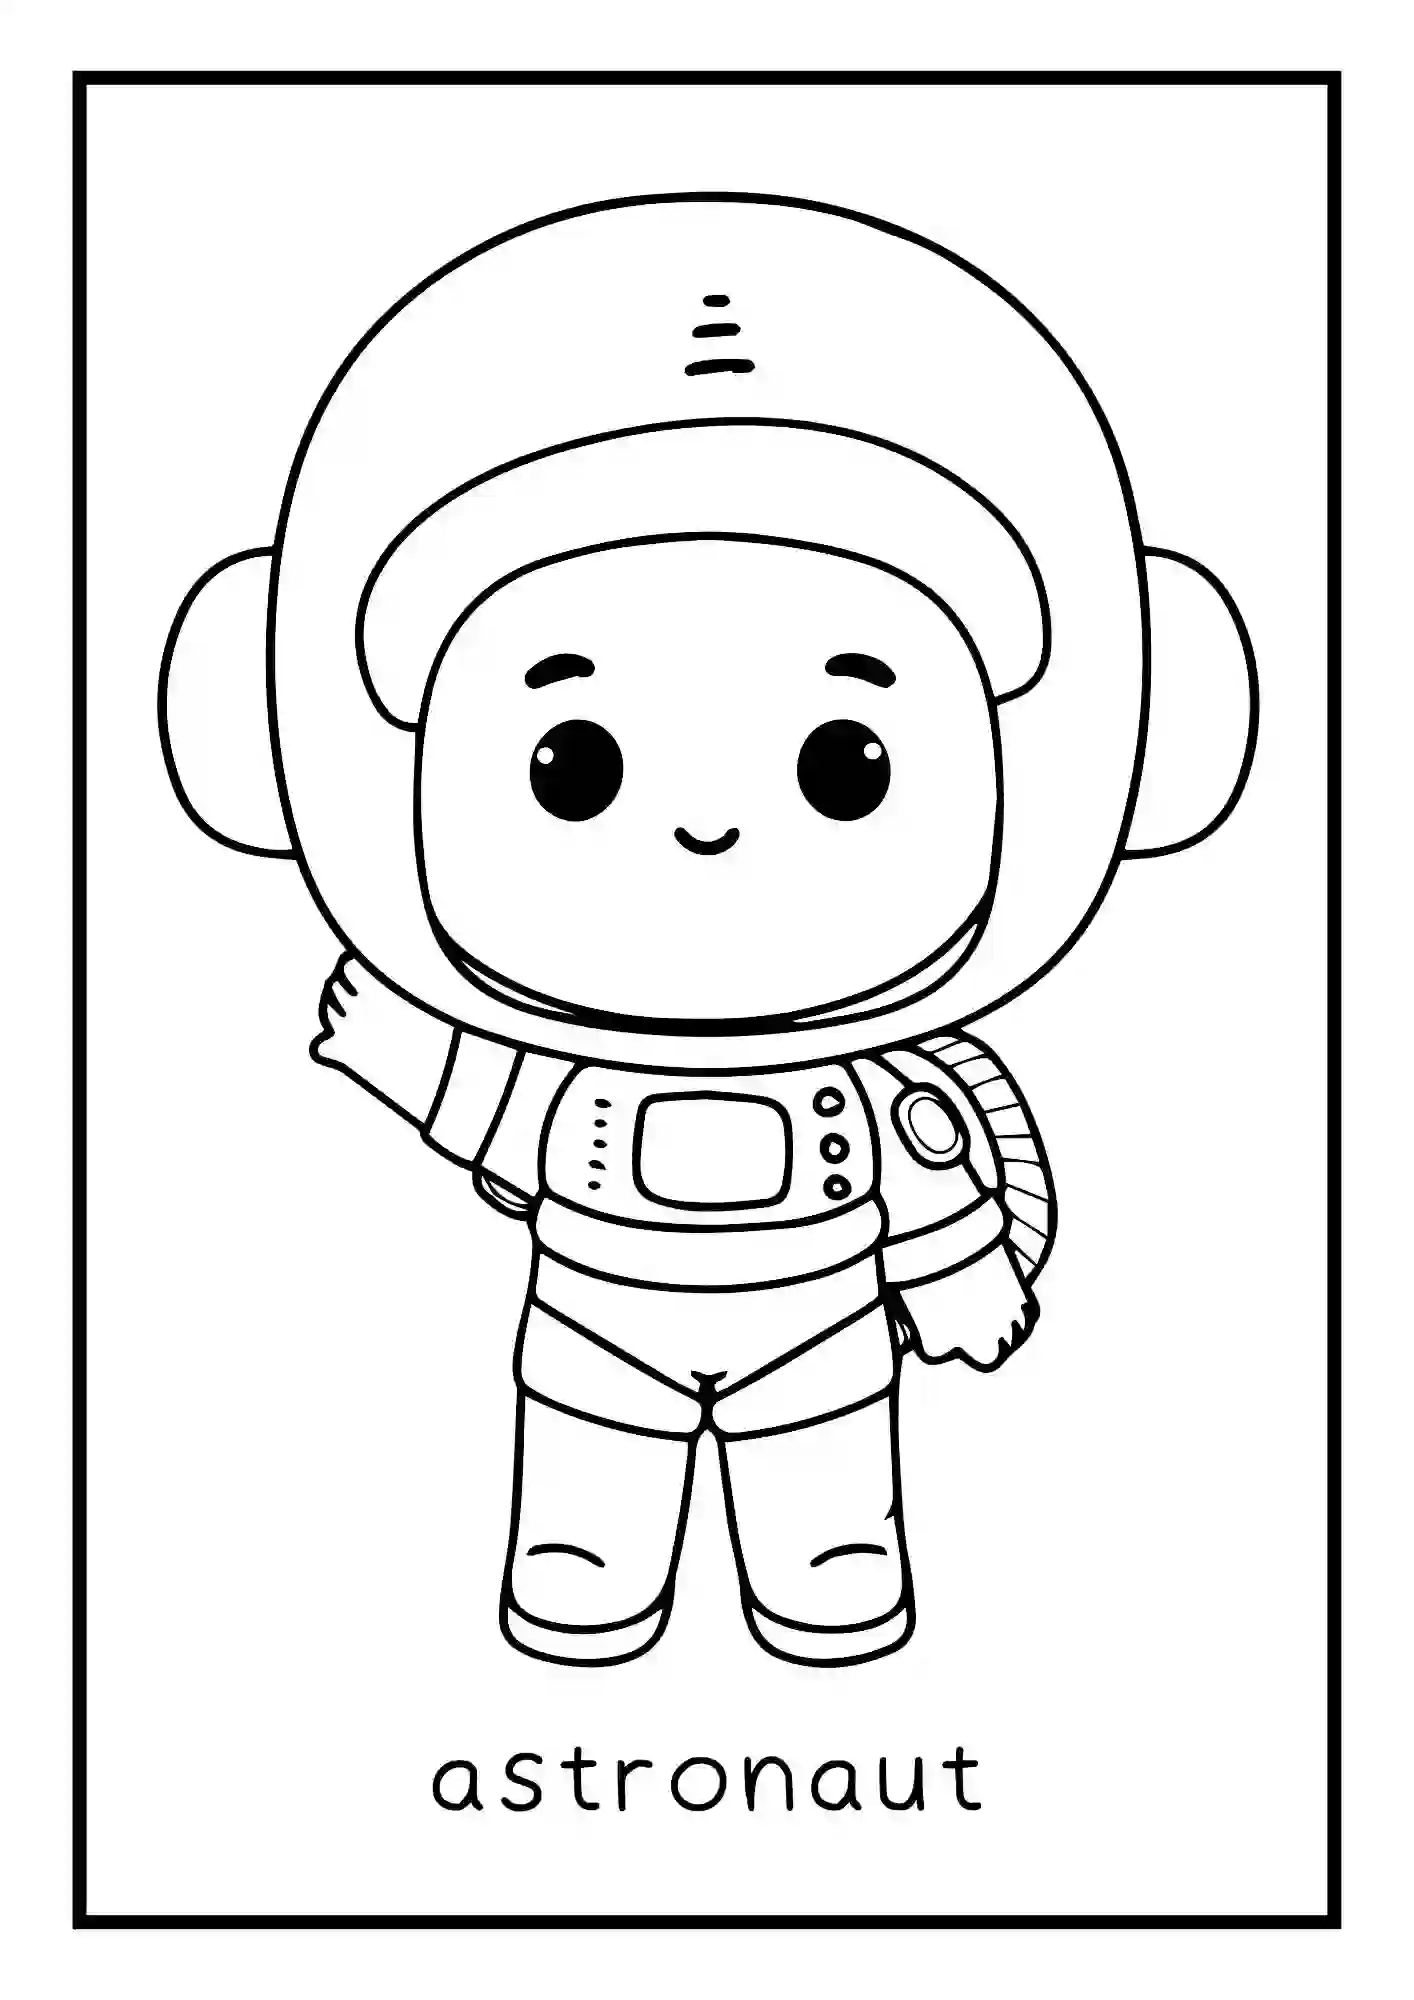 Different Professions, occupations, carriers, jobs, Coloring Worksheets (astronaut)